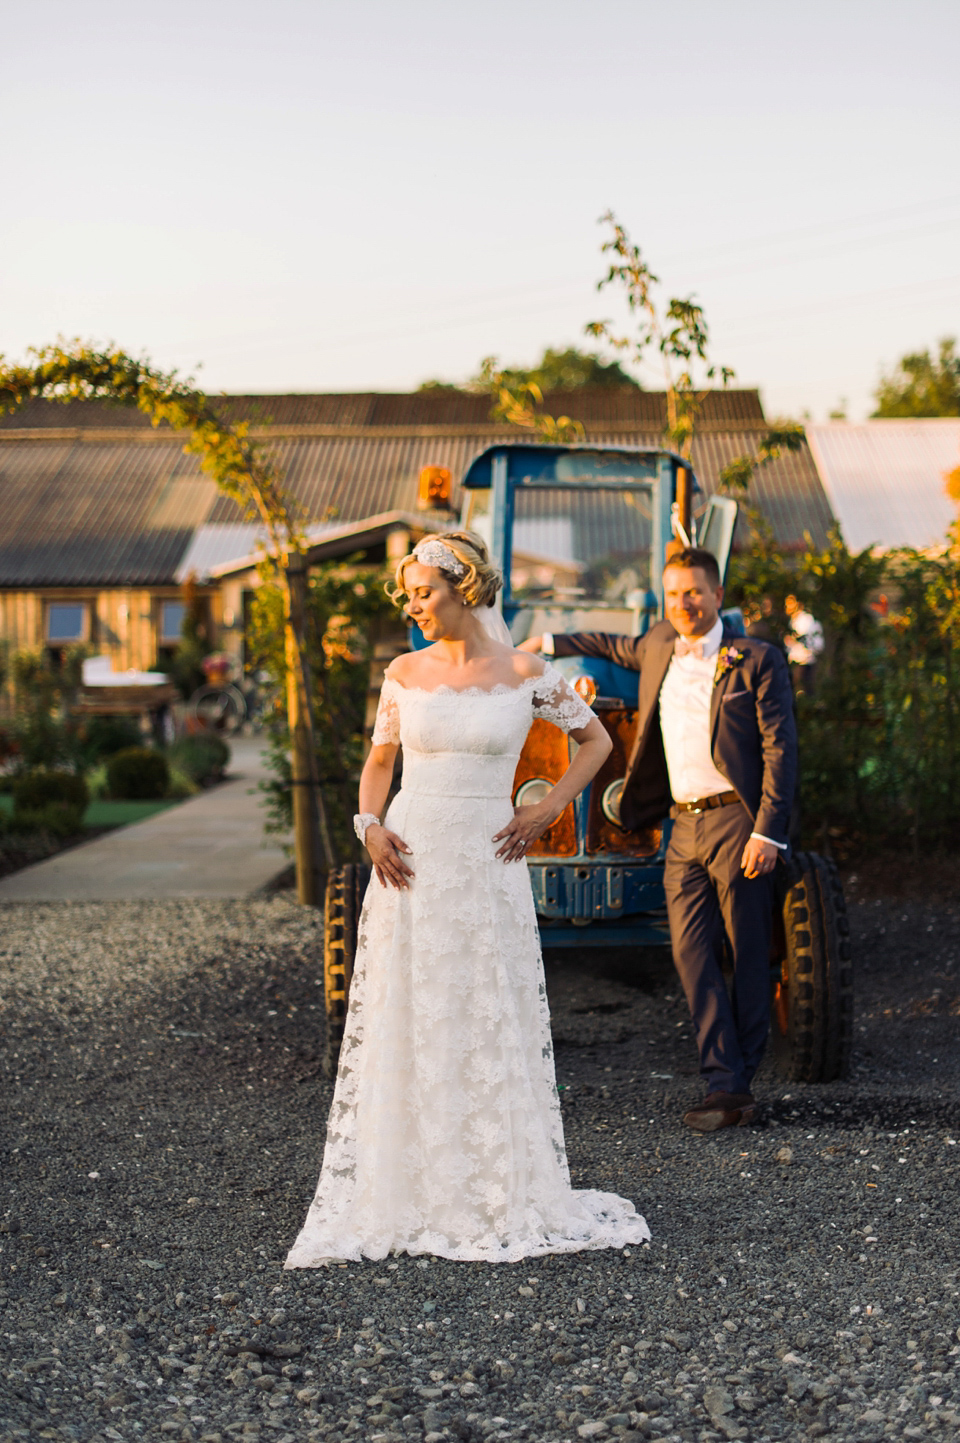 Temperley London for a colourful and elegant Autumn Barn Wedding. Photography by Helen Plus David.